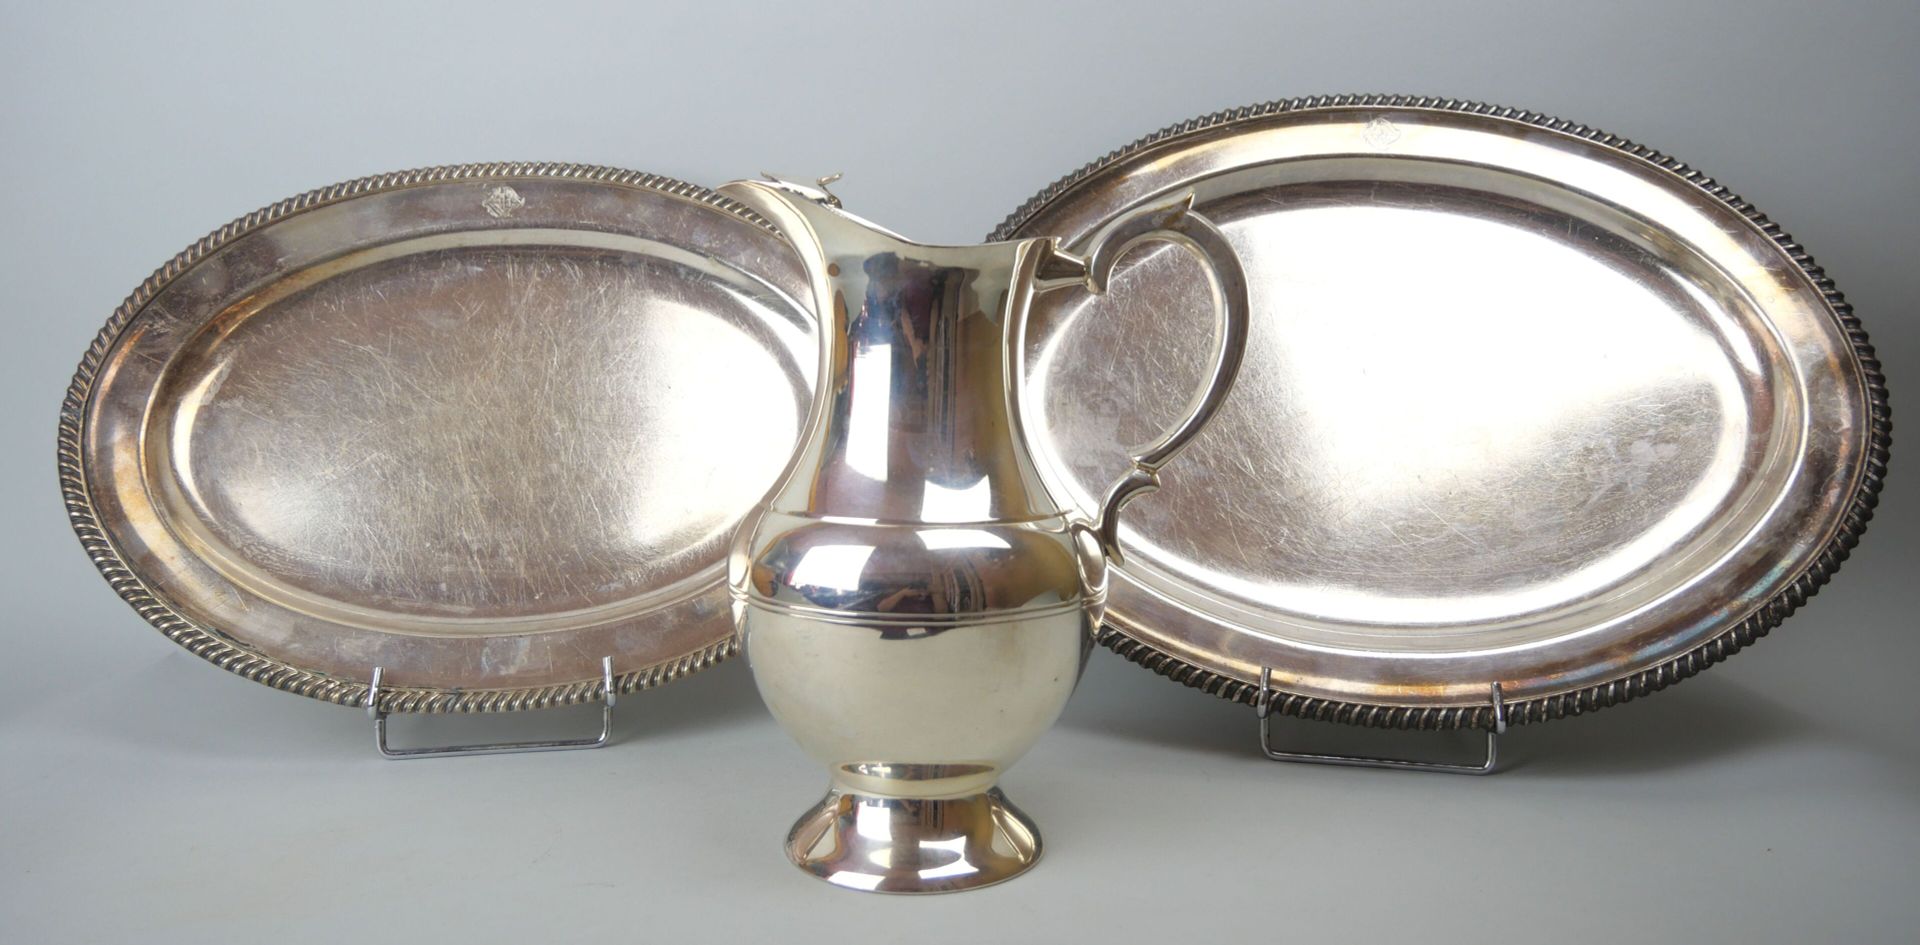 Null Lot in silver plated metal including: 

2 trays of oval shape with frieze o&hellip;